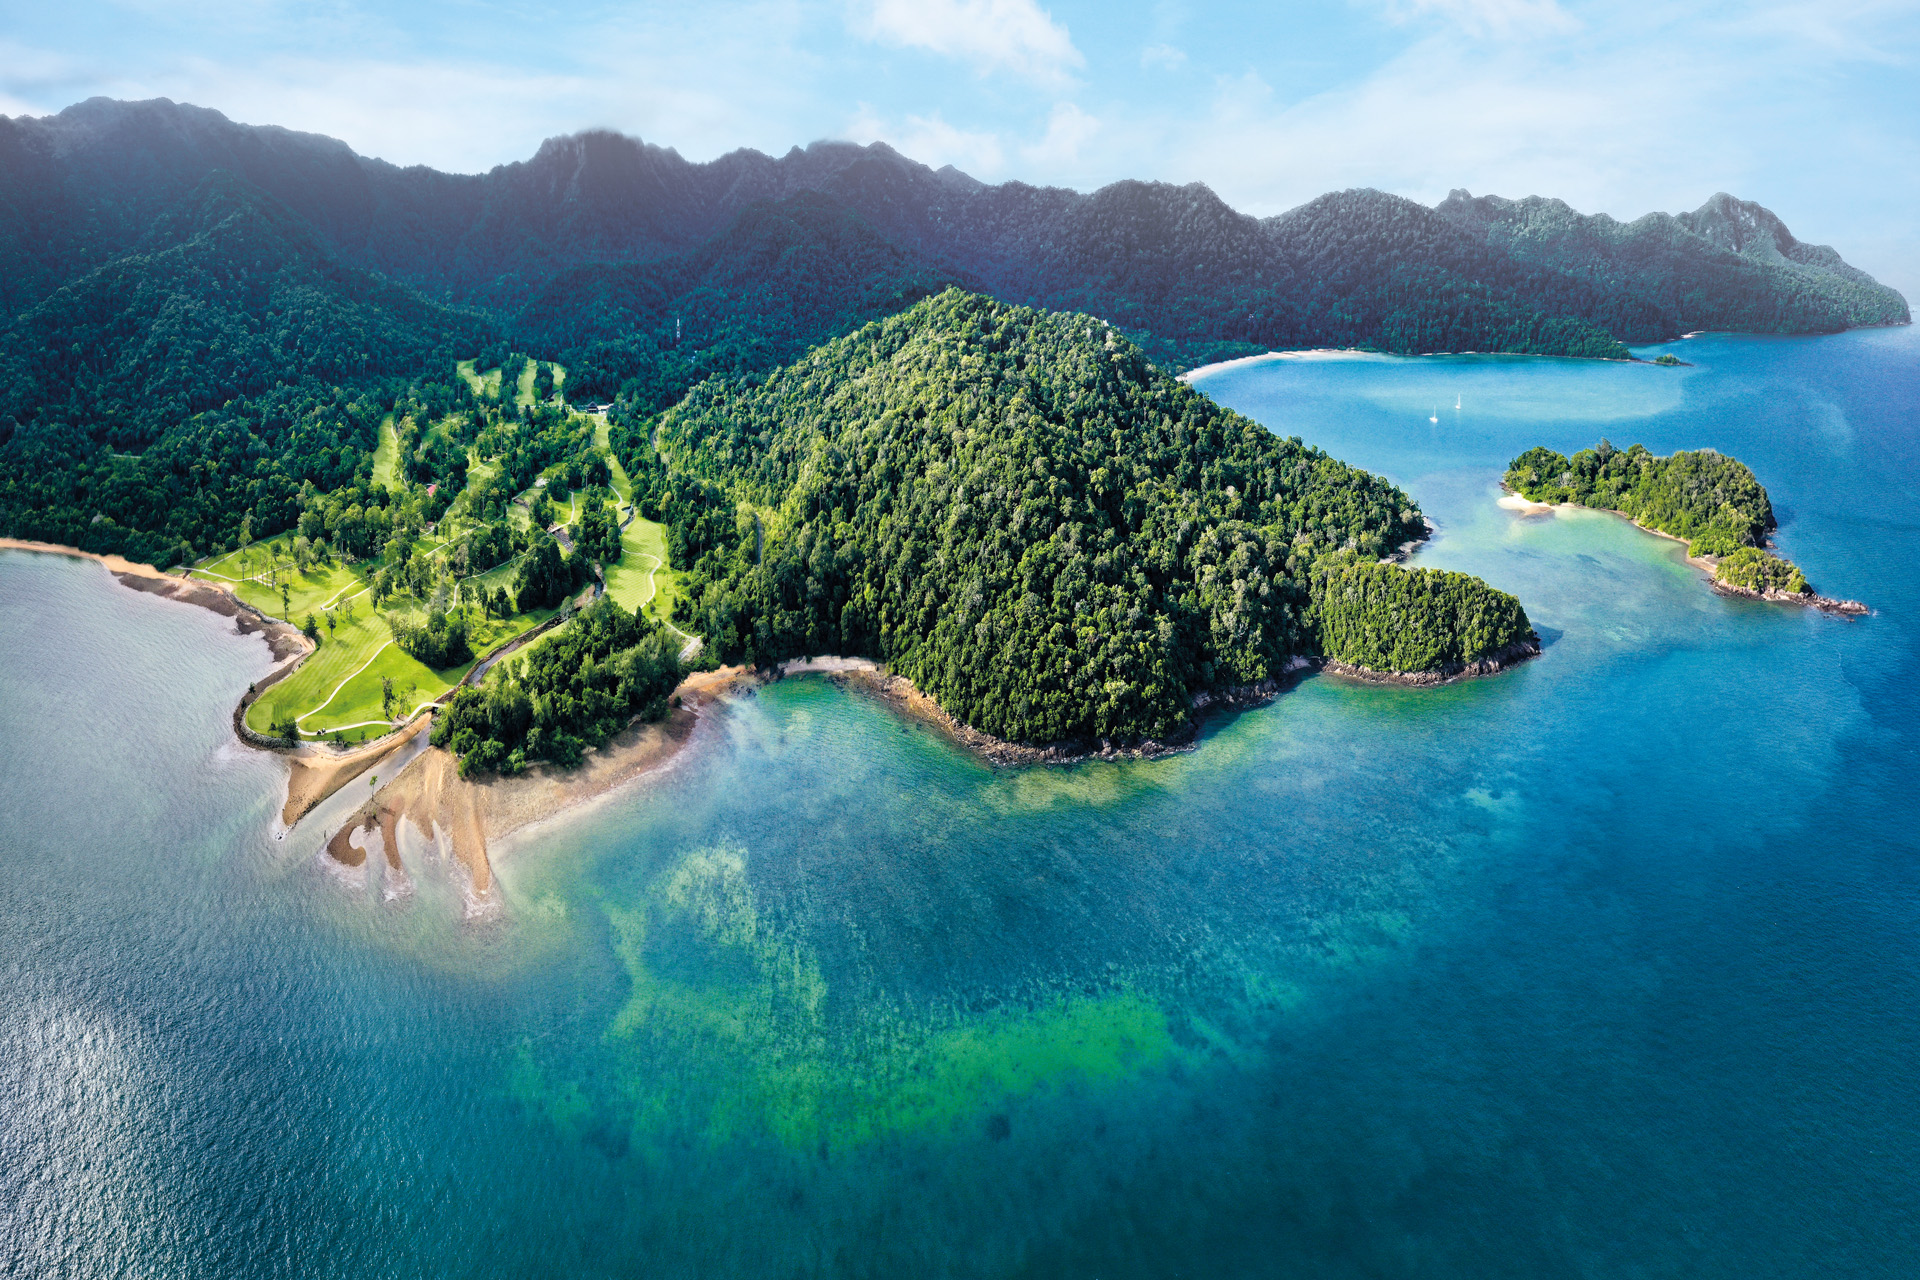 Serpents In Paradise: The Datai Langkawi, Malaysia